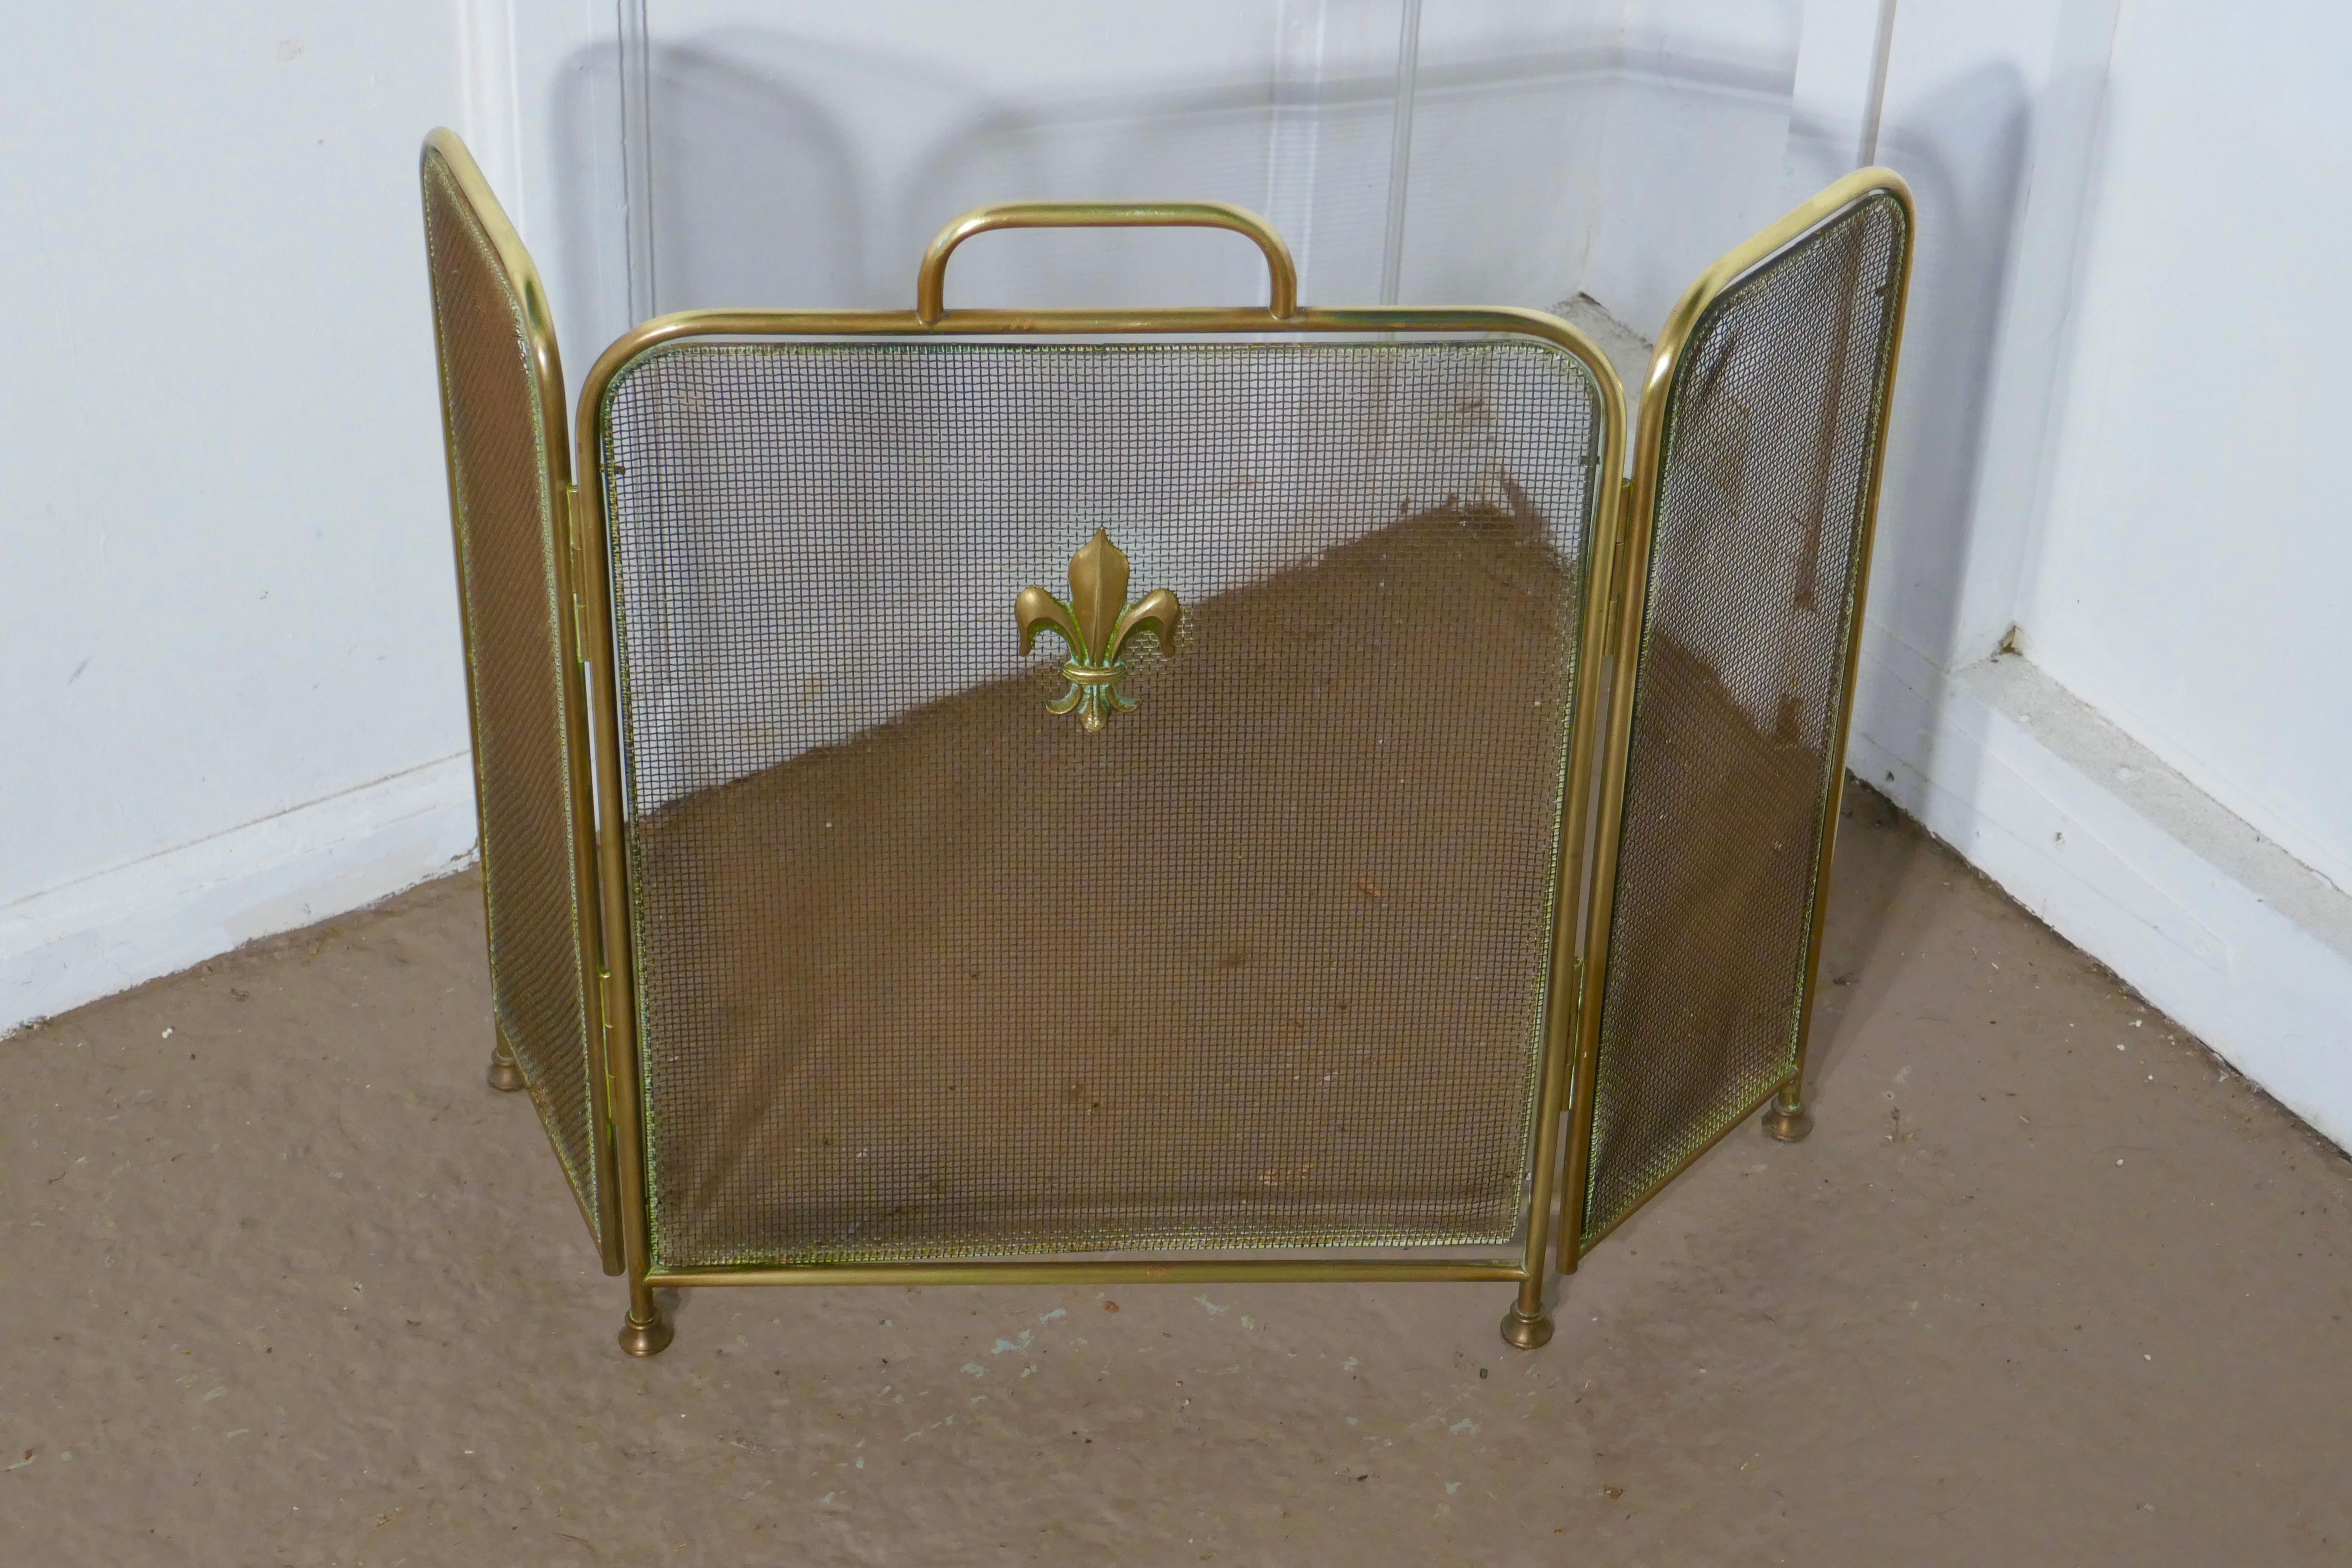 19th century folding brass fire guard

This very useful spark guard is made in brass, the brass frame has fine mesh infill decorated with a fleur-des-lys, it has the added advantage that it folds flat for storage, and when opened out it can be